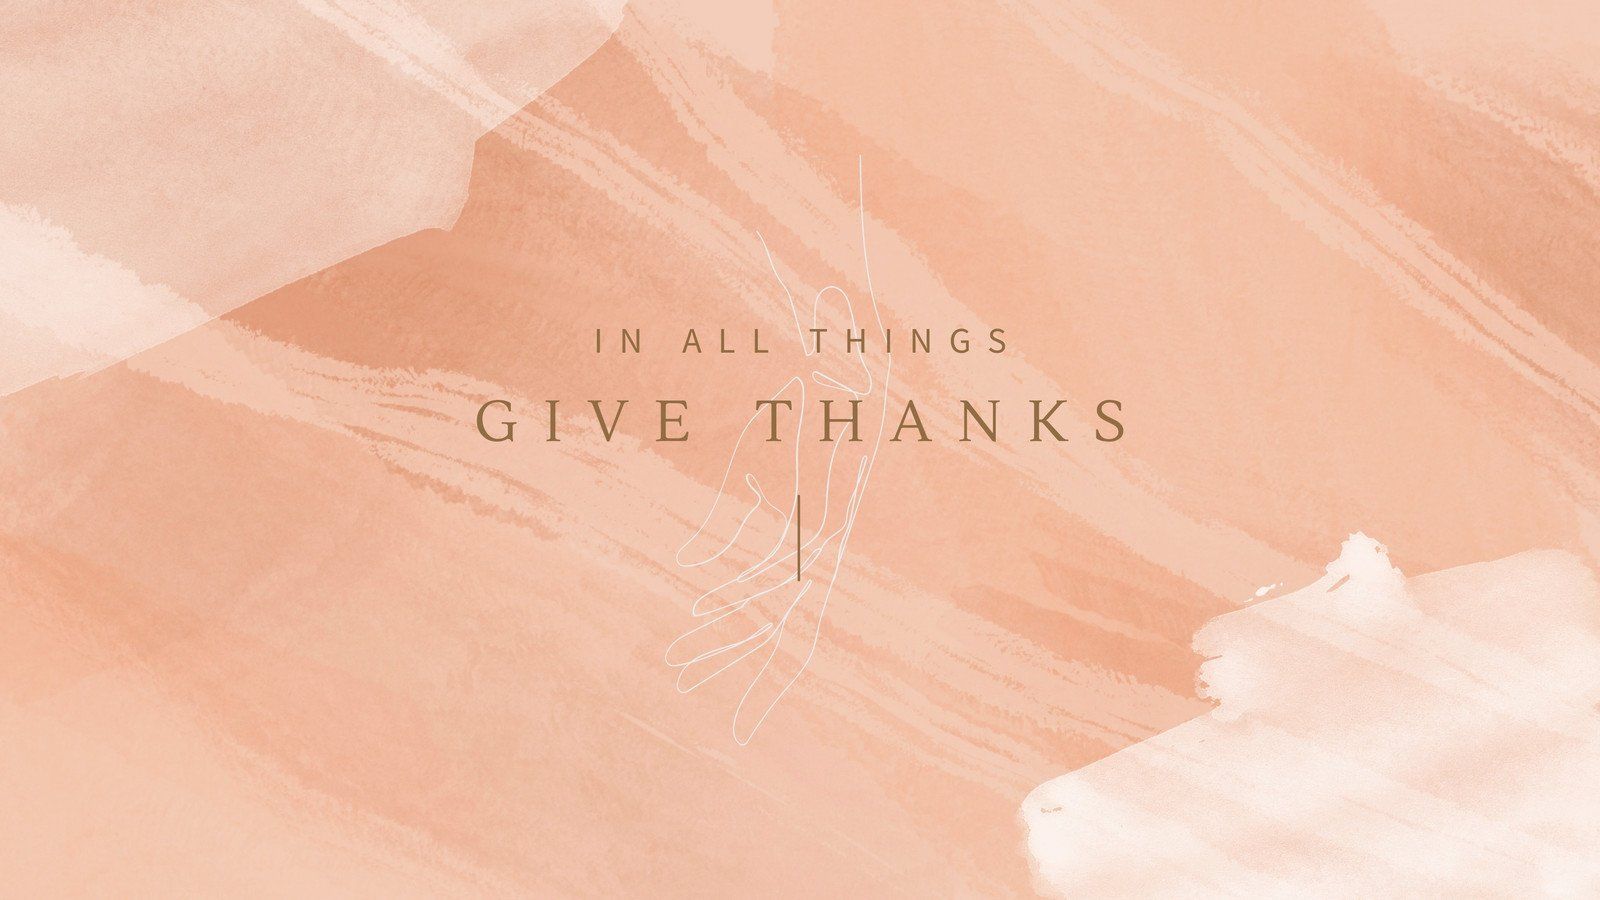 In all things give thanks - Thanksgiving